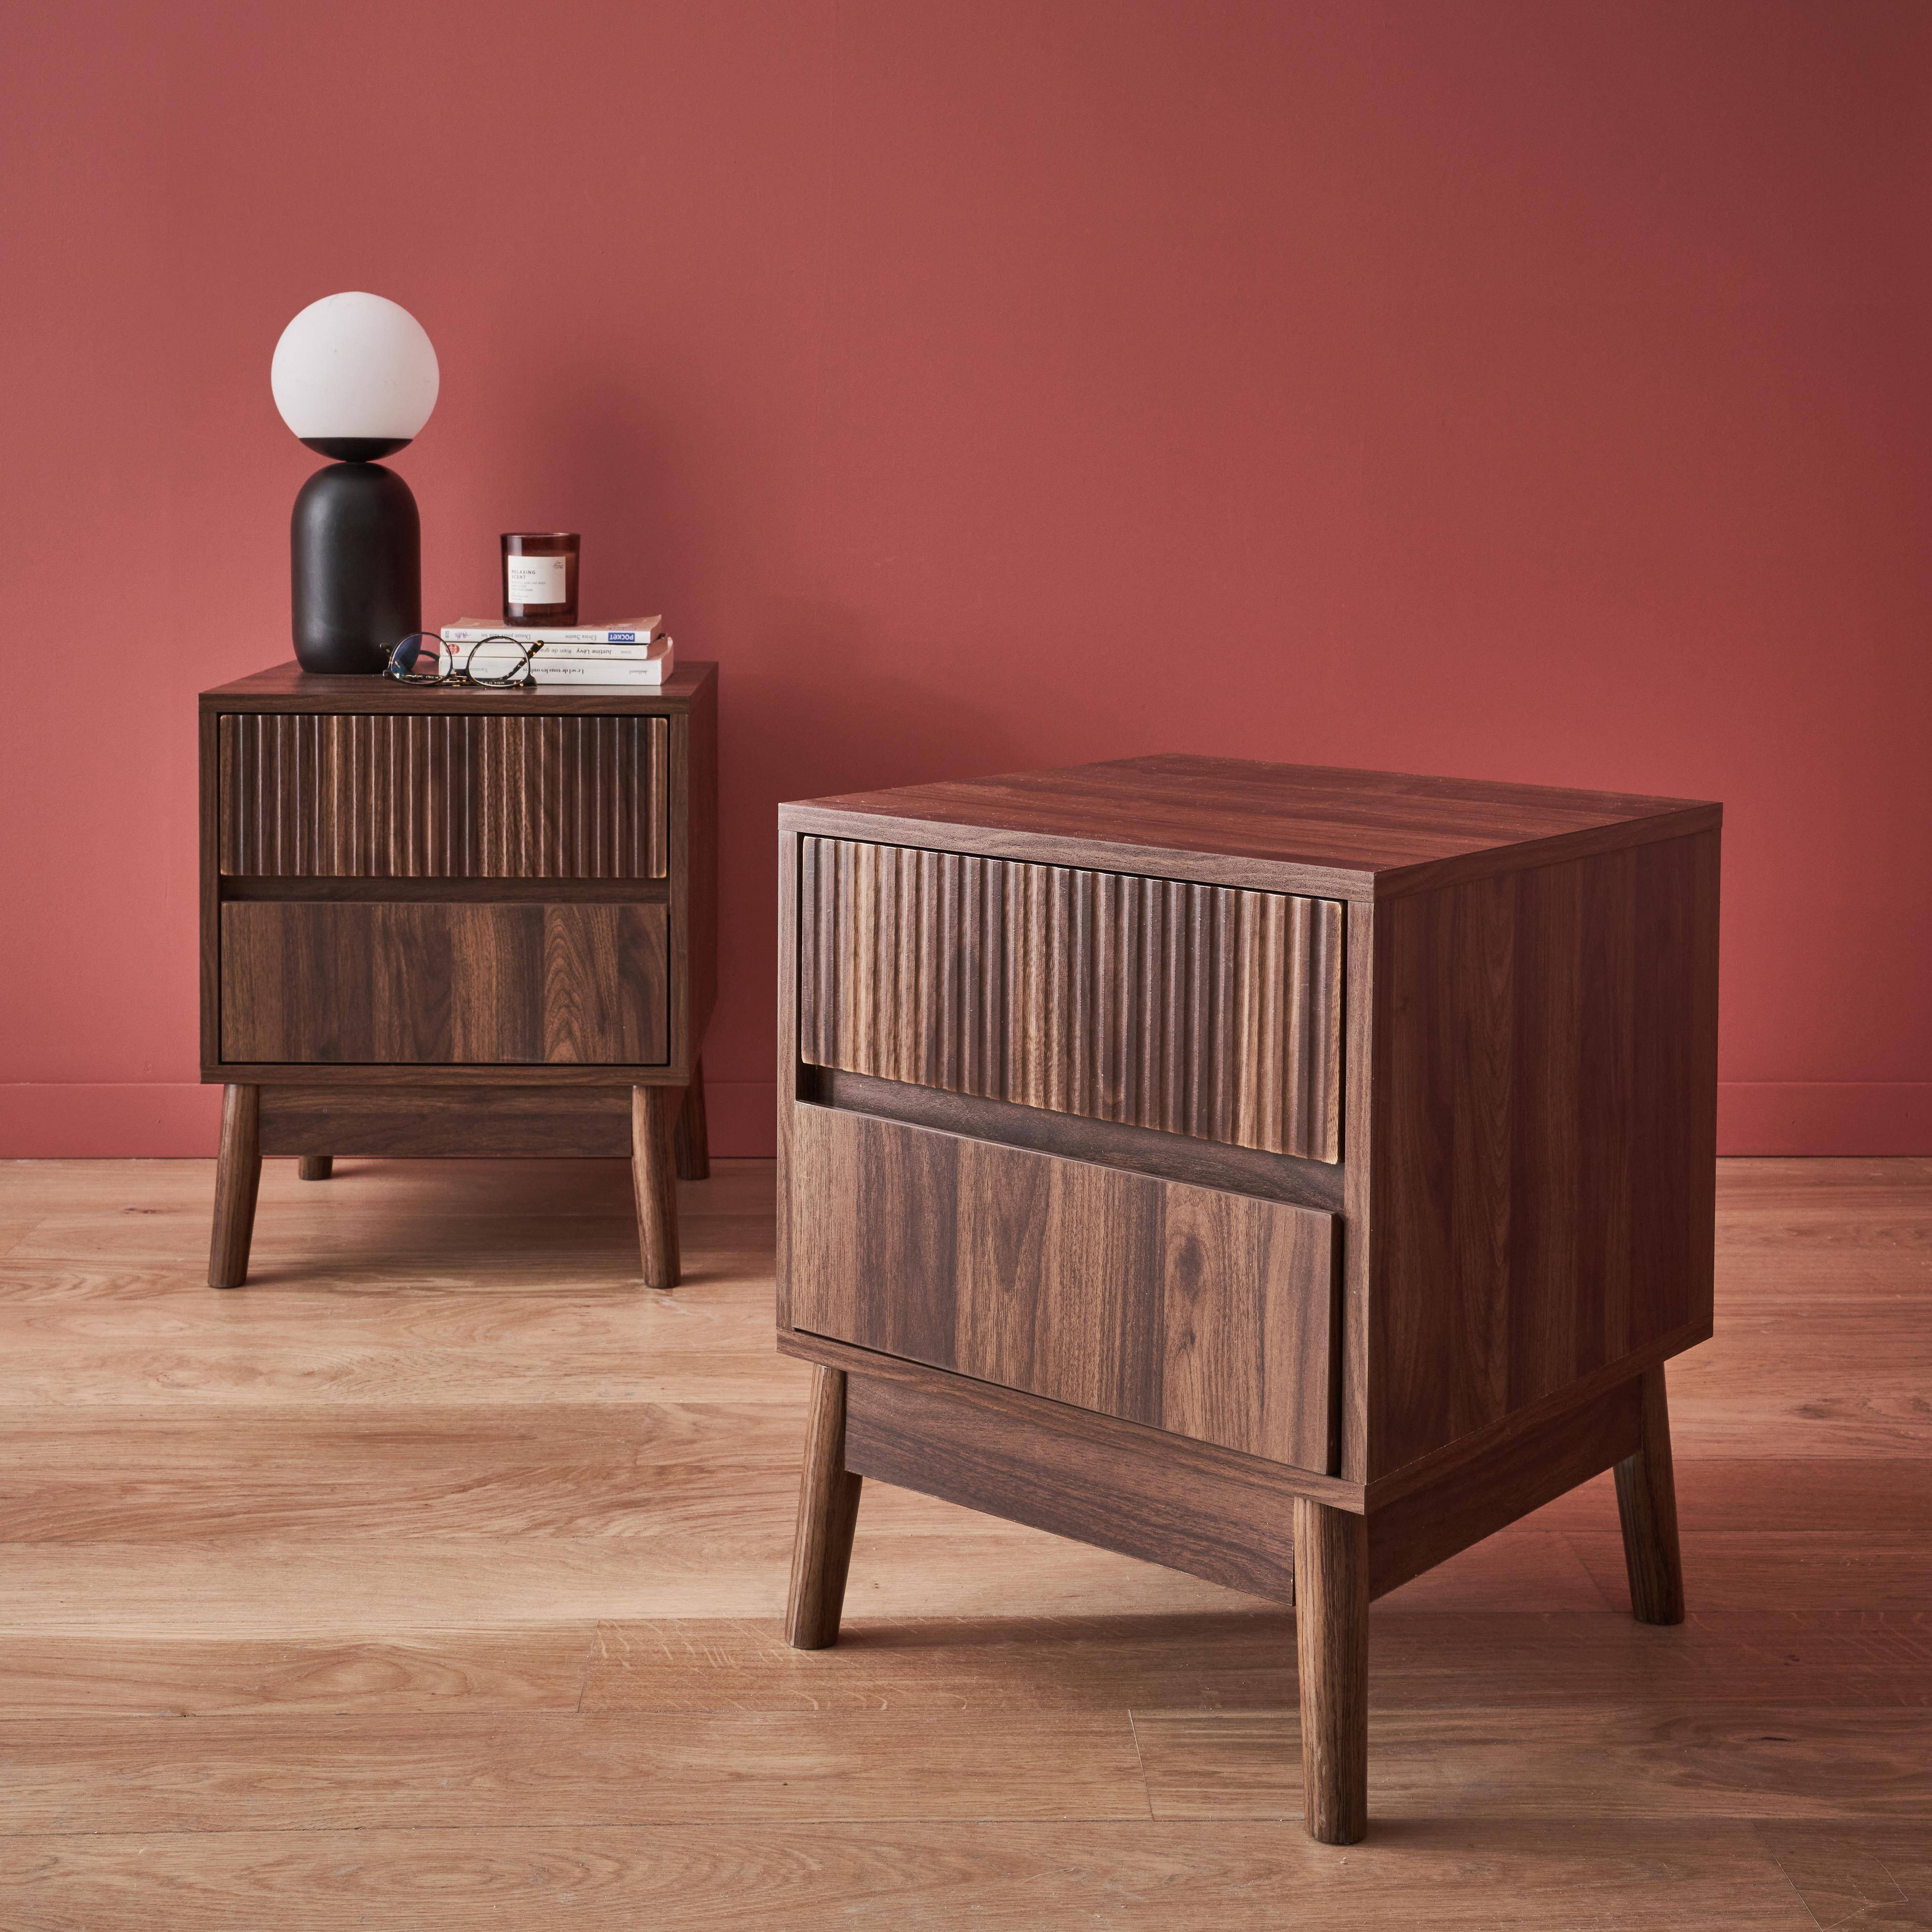 Pair of grooved wooden bedside tables with 2 drawers, 40x39x48cm - Linear - Dark Wood colour,sweeek,Photo1